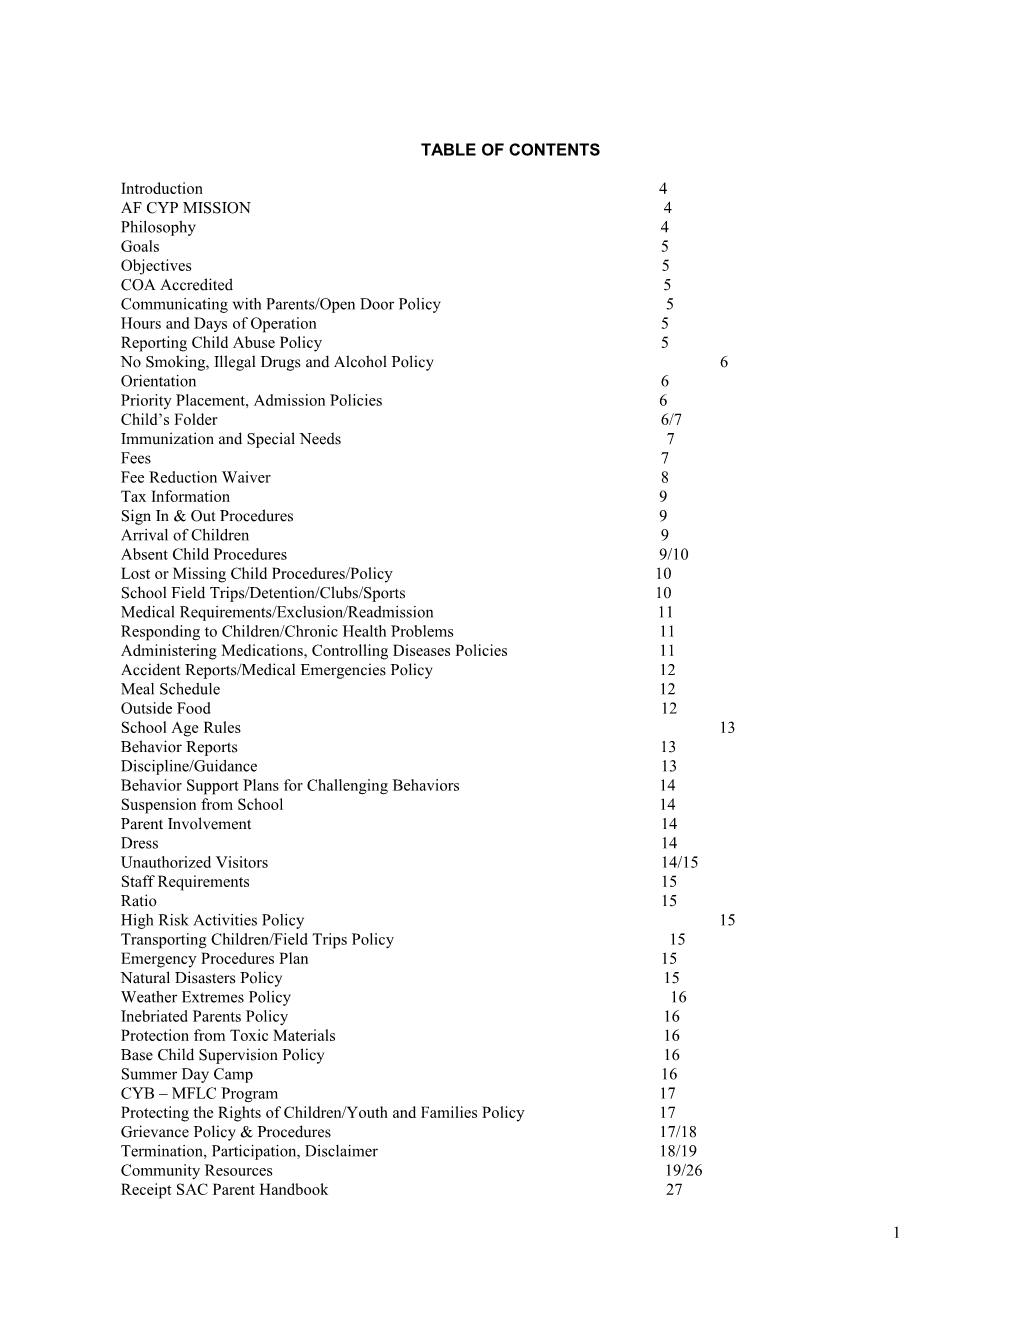 Table of Contents s435